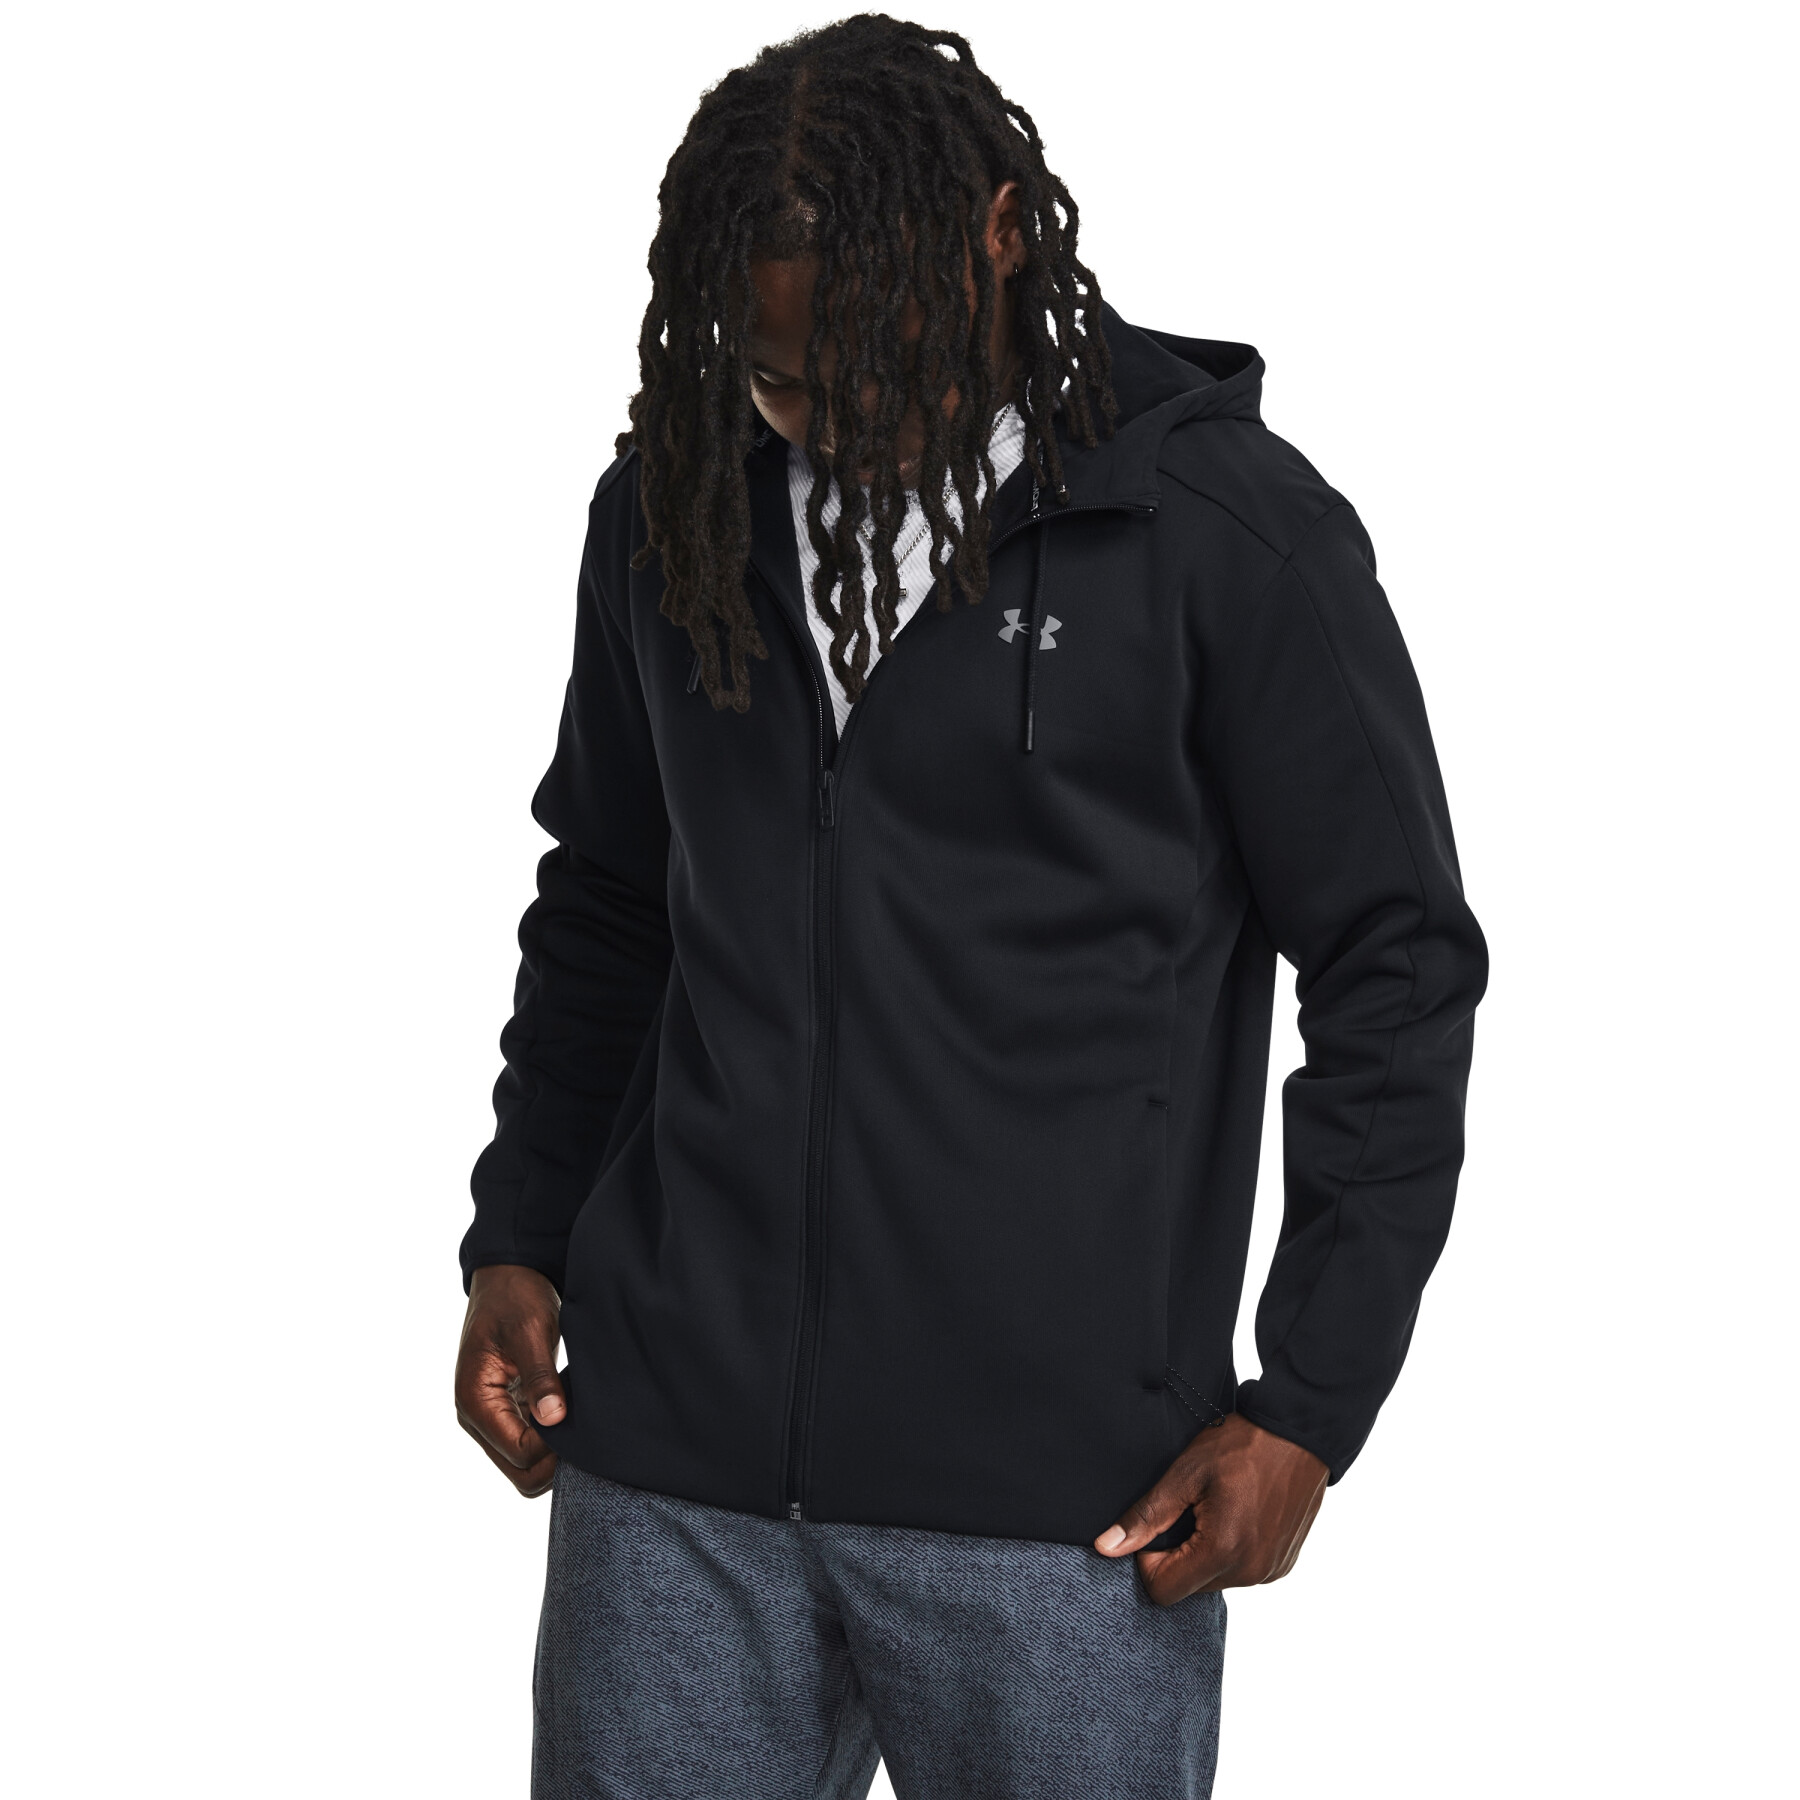 Chaqueta impermeable Under Armour Essential Swacket